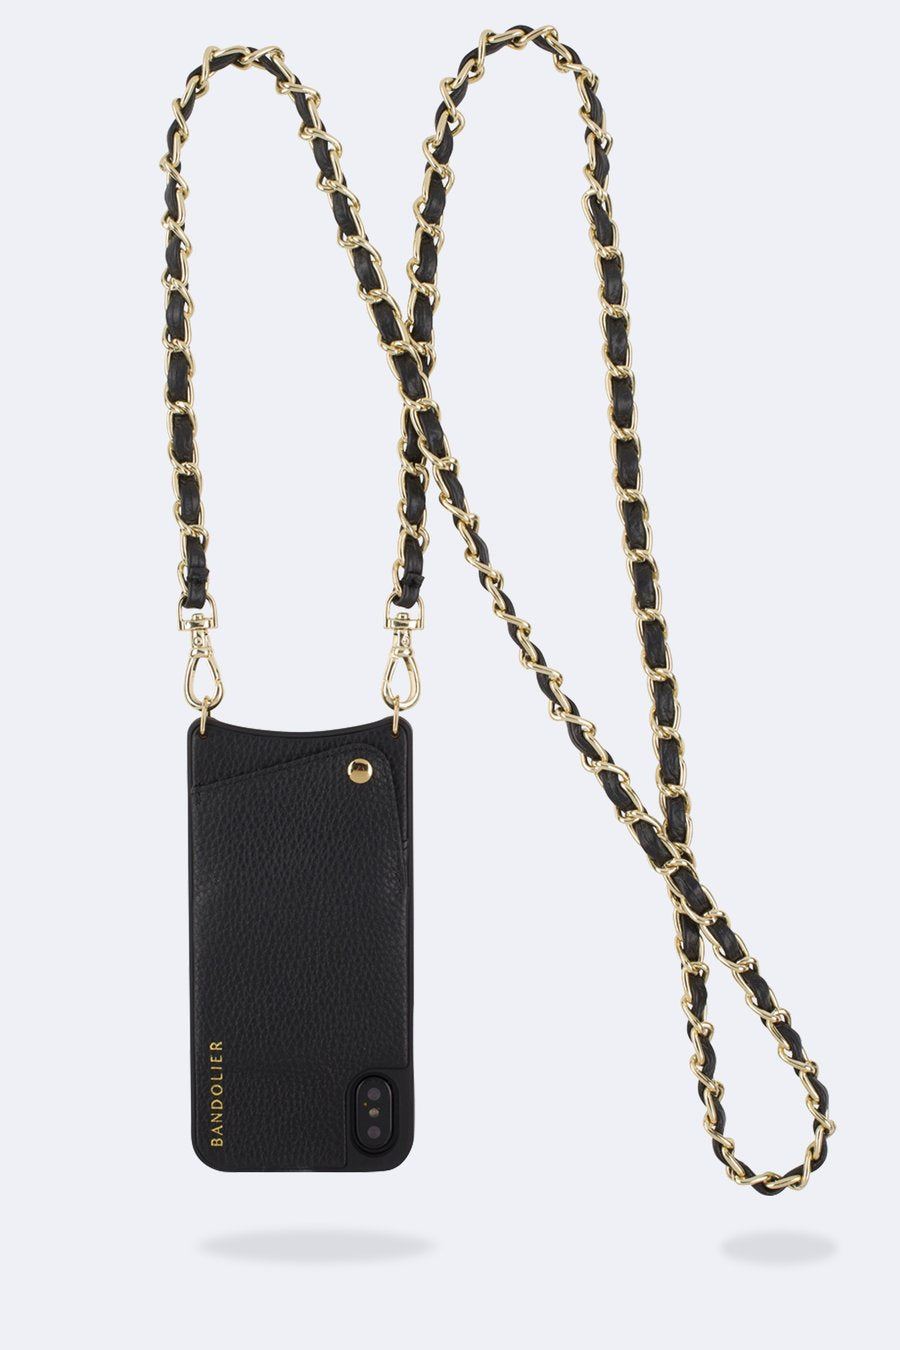 Bandolier - Lucy Black/Gold for XS Max